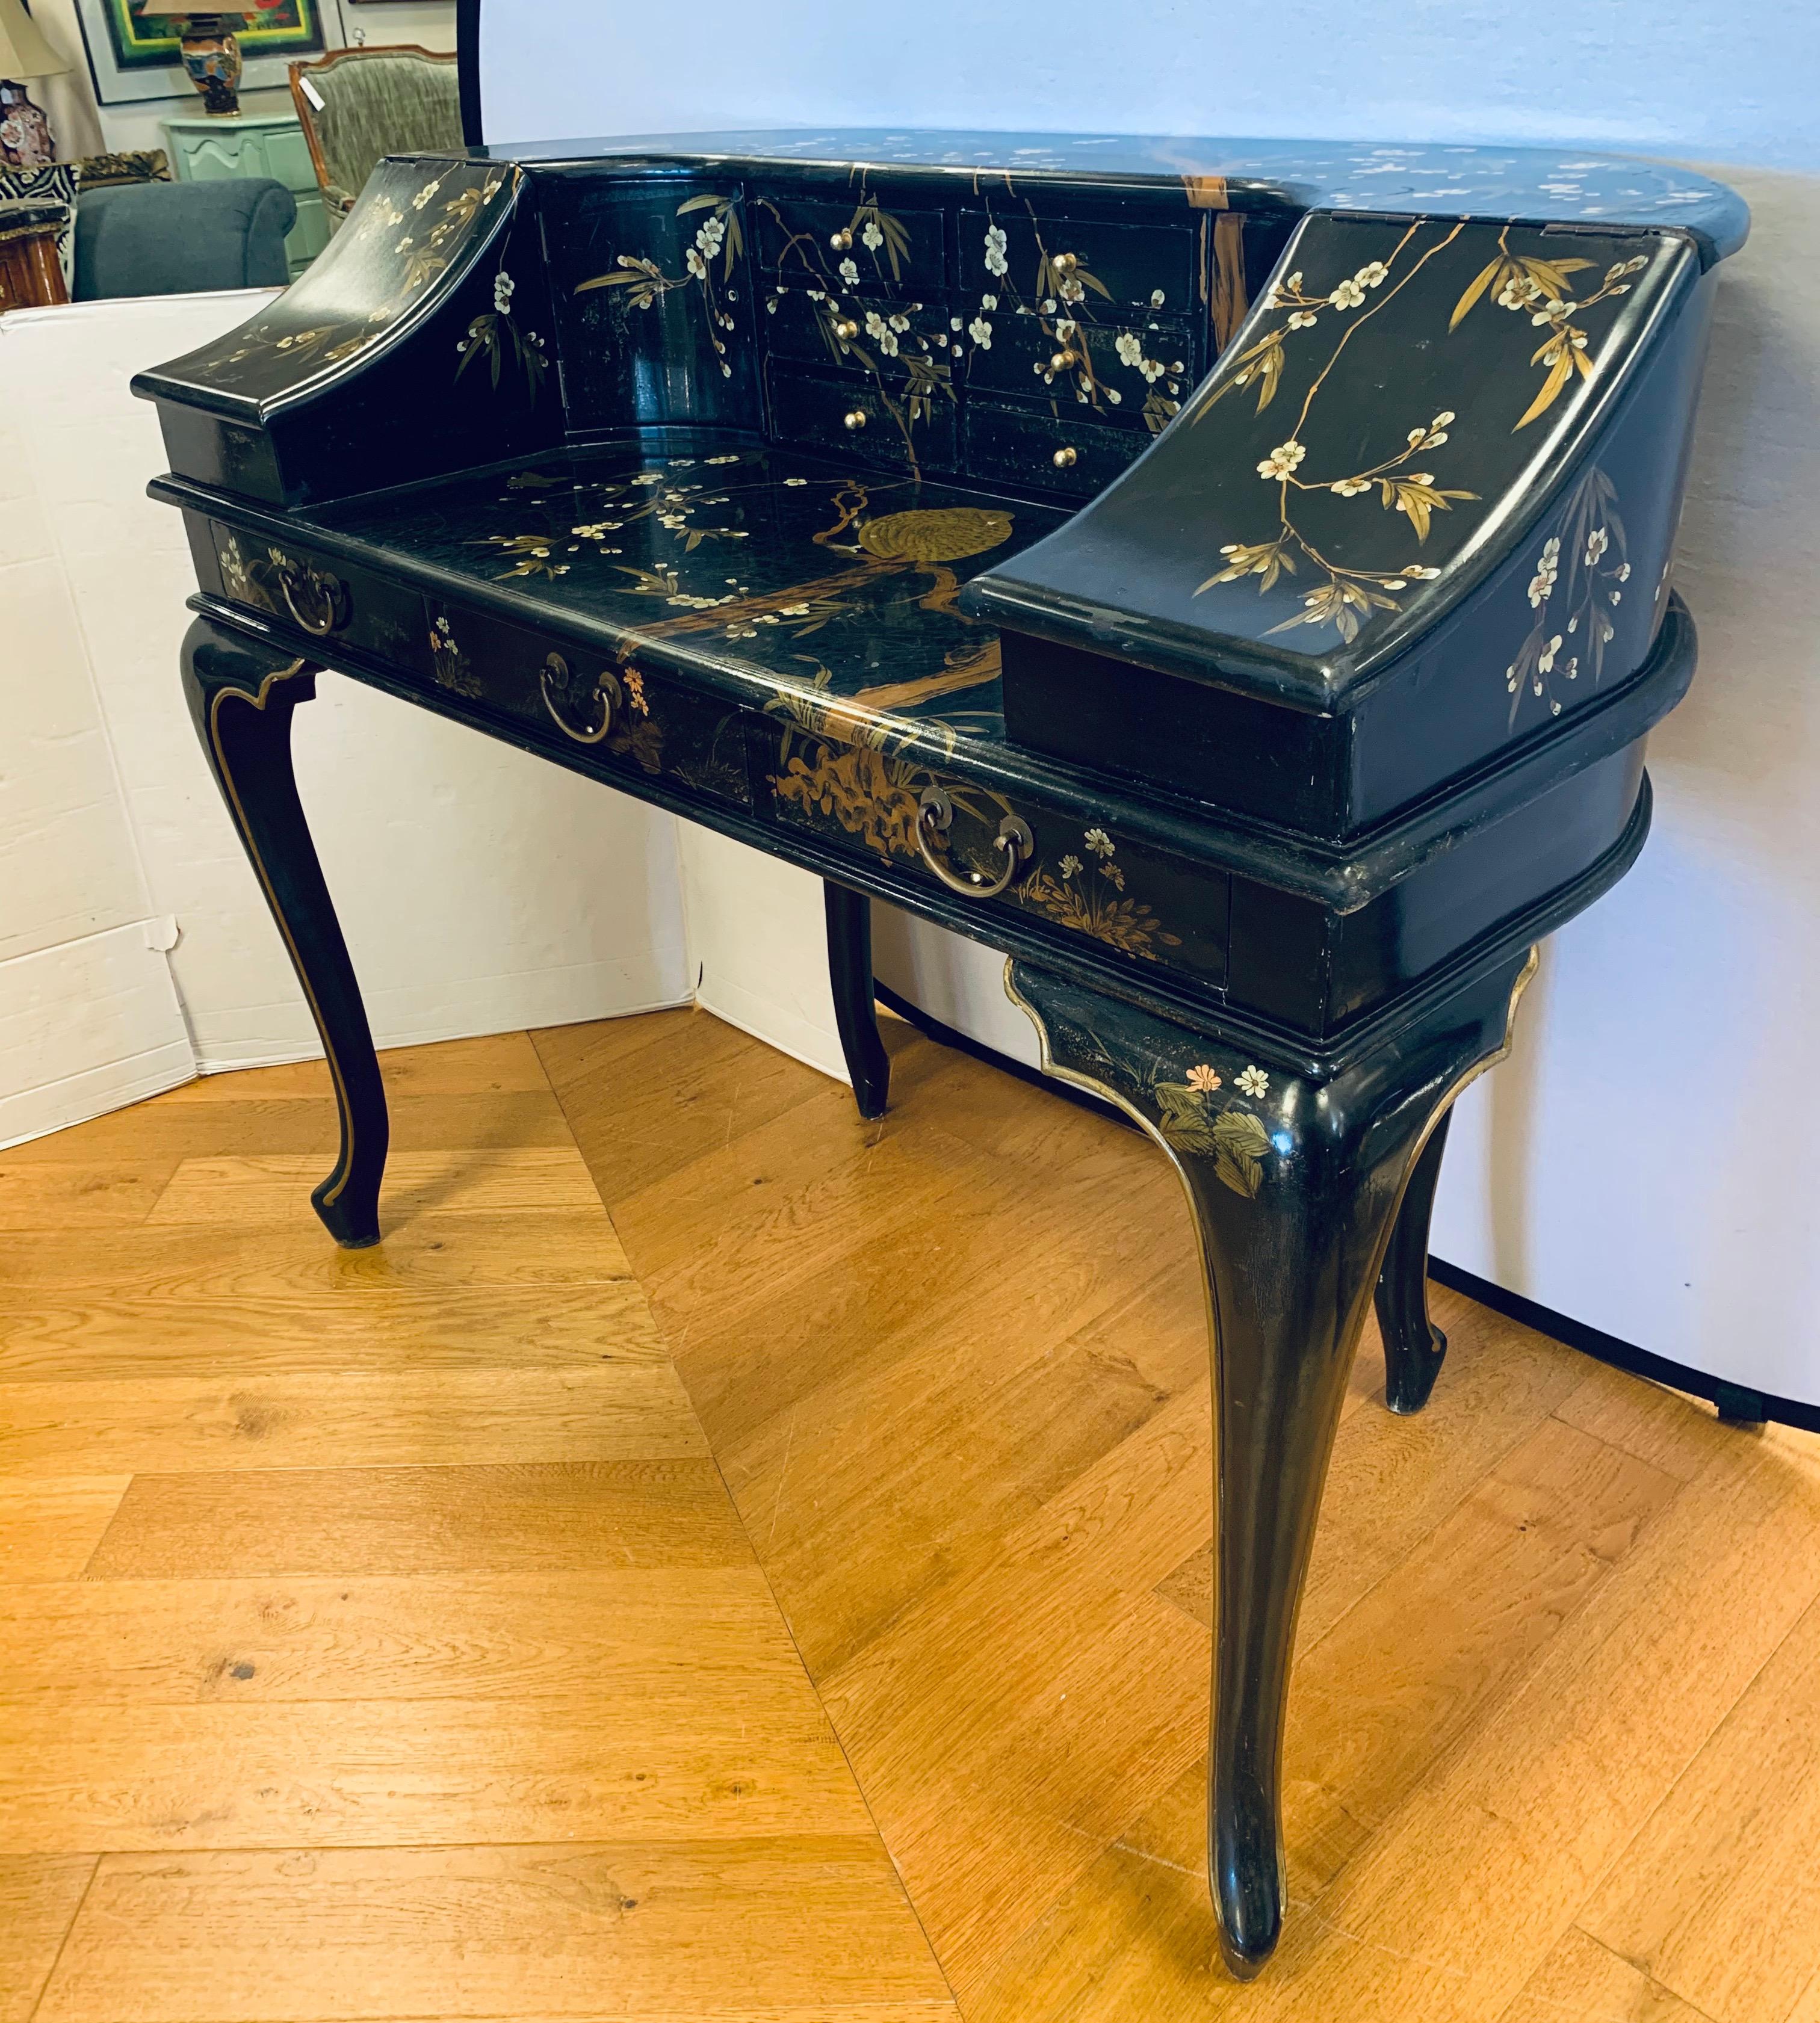 Magnificent vintage black lacquer chinoiserie Carlton desk by Maitland Smith. Age appropriate wear but still in great shape. And replete with Carlton style lines, circa 1970s. Features red drawers.